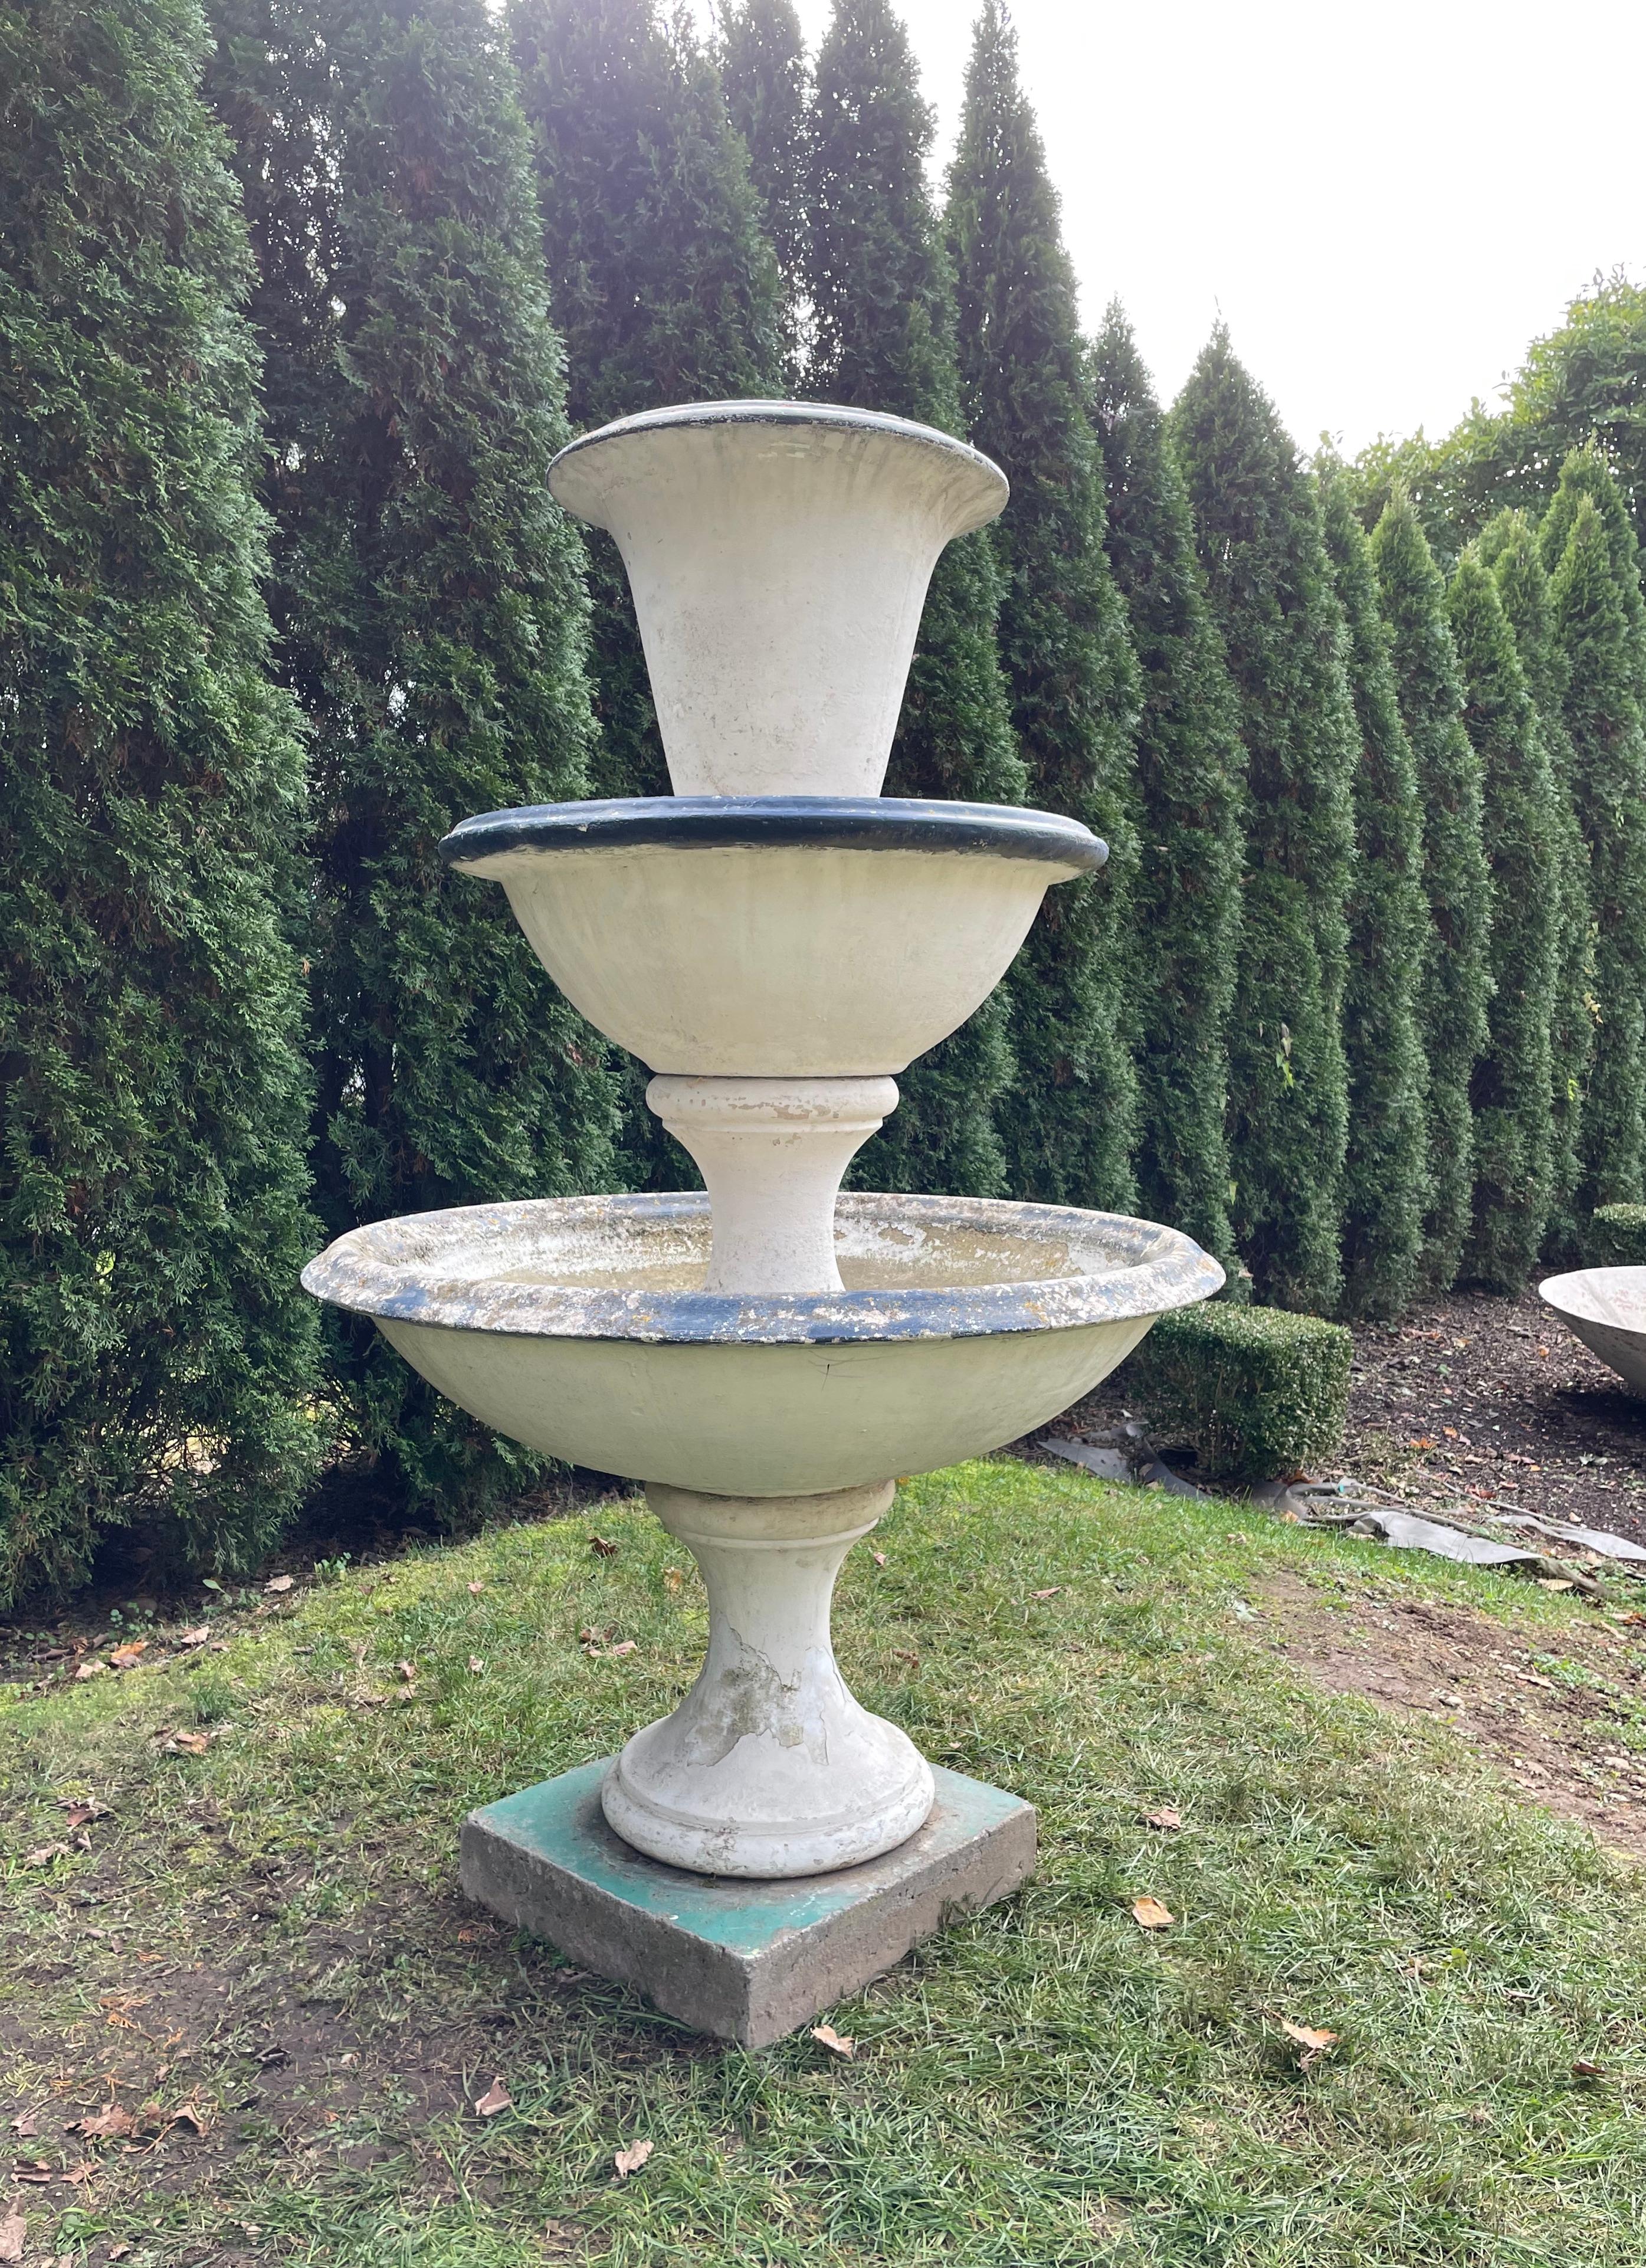 We rarely buy tiered fountains, but were struck by the simple, elegant form of this one, its wonderful condition, and the ease with which it is assembled. In six pieces, the overall weight is about 700 lbs., but the largest bowl is no more than 250